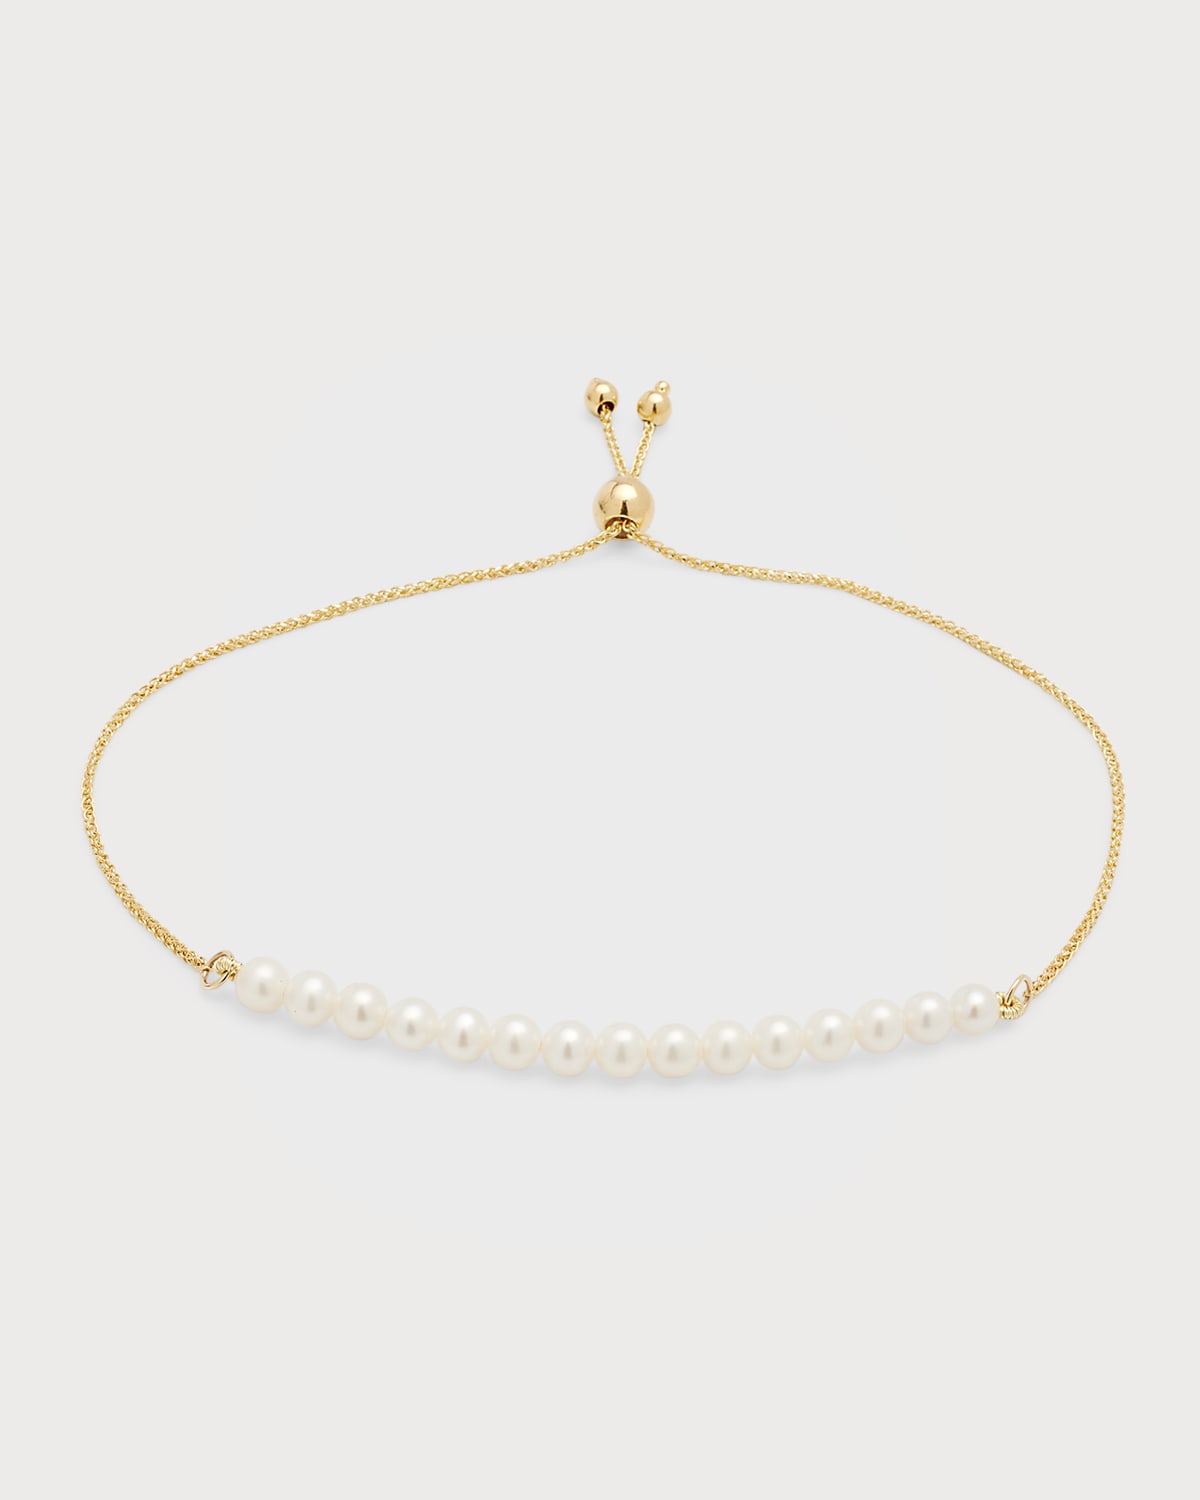 14K Bolo Bracelet with Freshwater Pearls